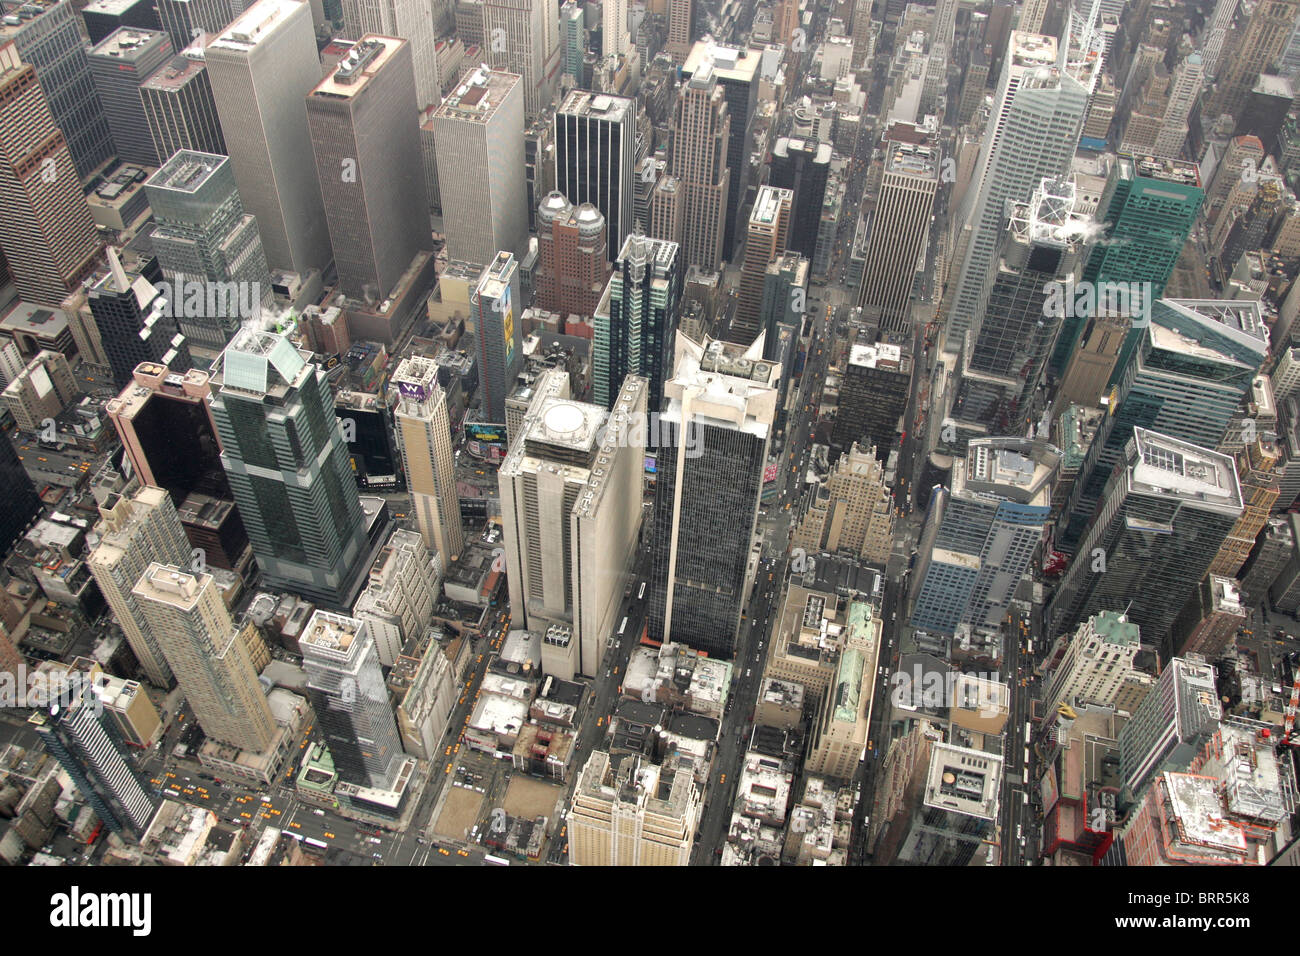 Aerial view of Times Square showing many skyscrapers Stock Photo